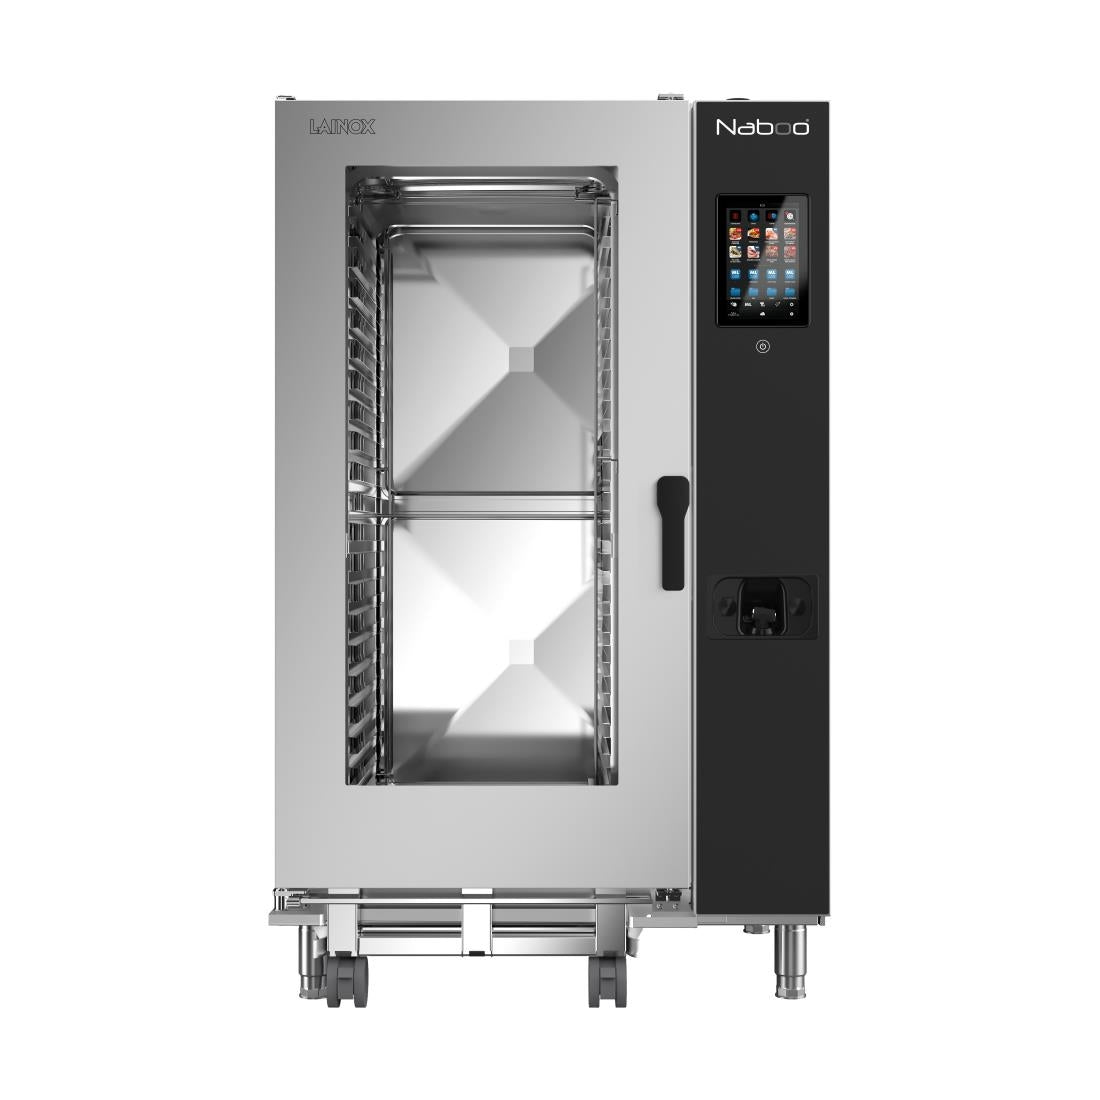 HP567 Lainox Naboo Boosted Gas Touch Screen Combi Oven NAG202BV 20X2/1GN JD Catering Equipment Solutions Ltd